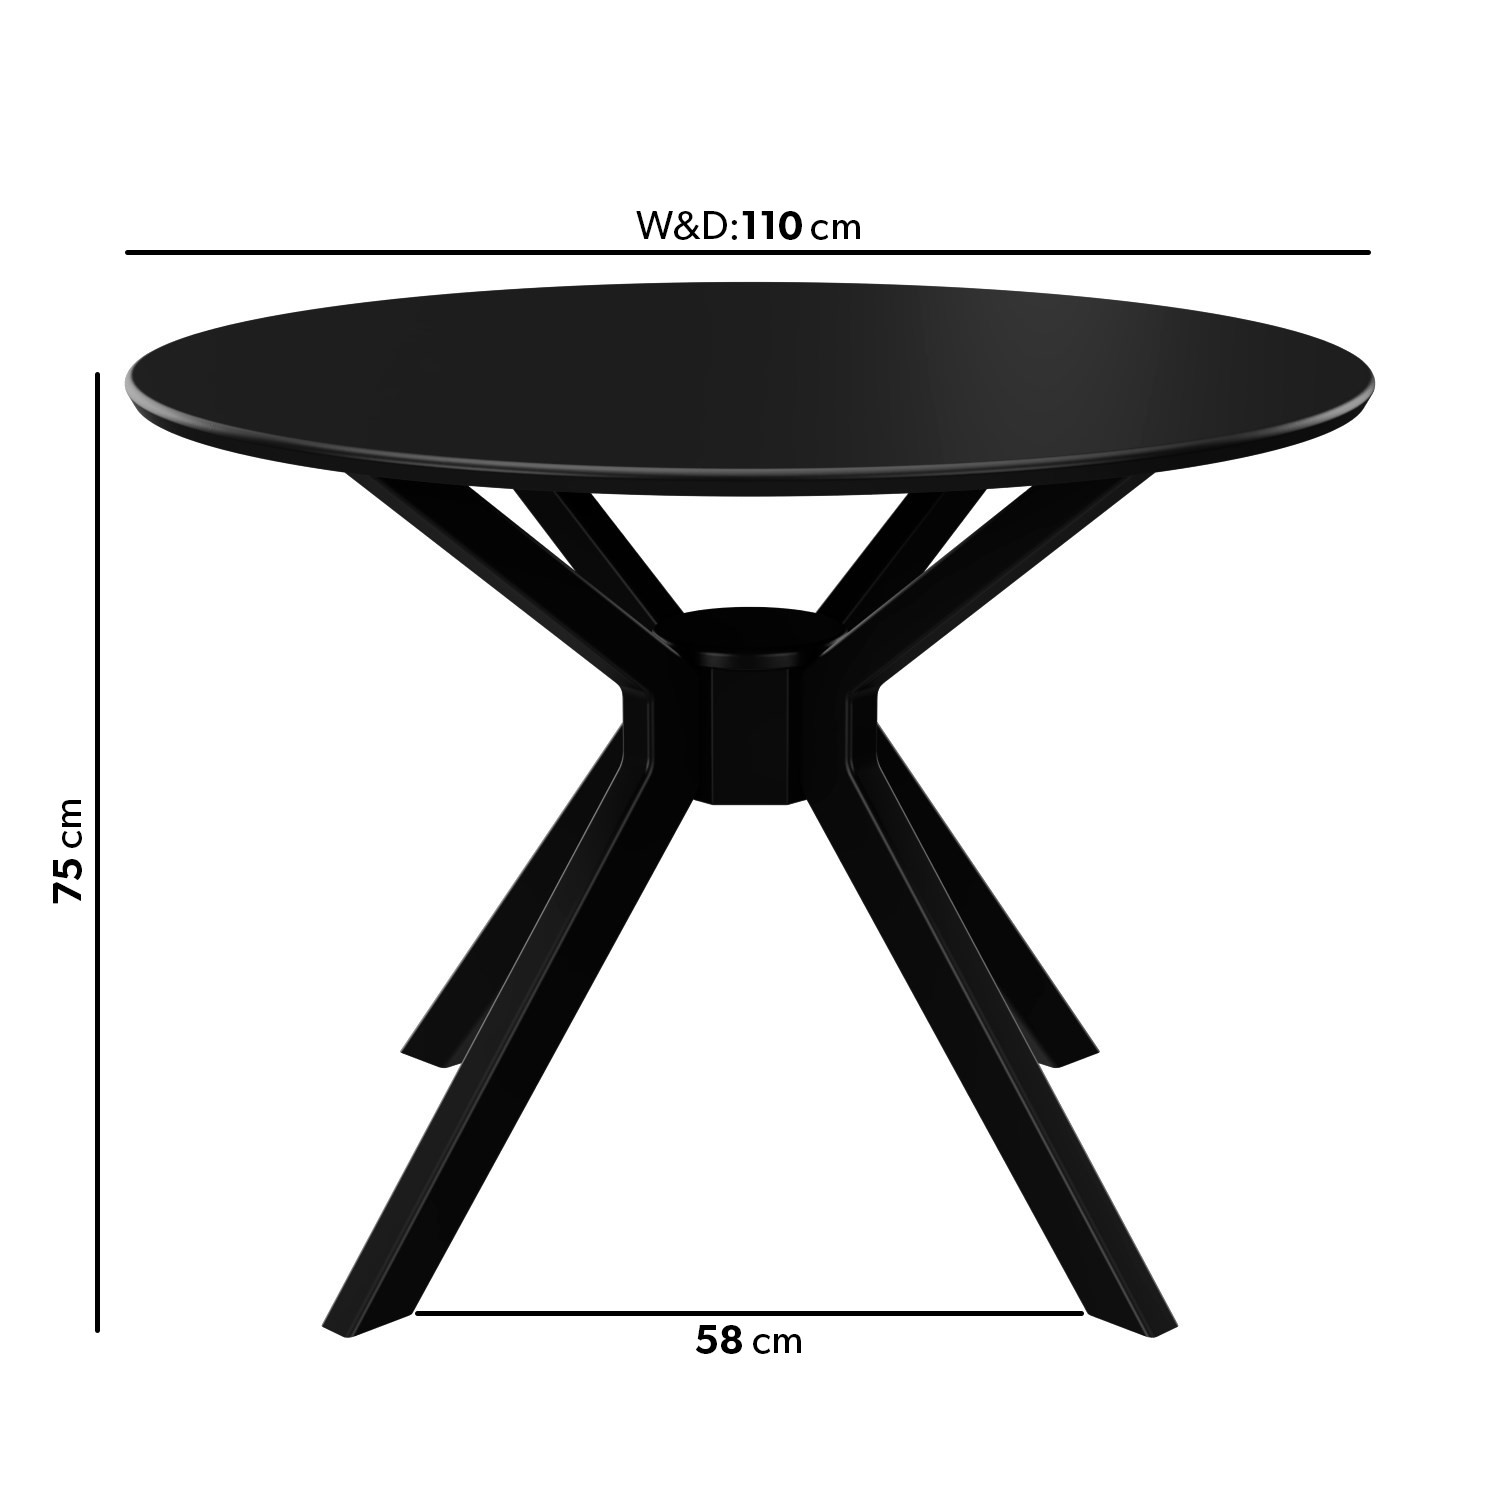 Round Black Dining Table Seats 4, Round Black Tables